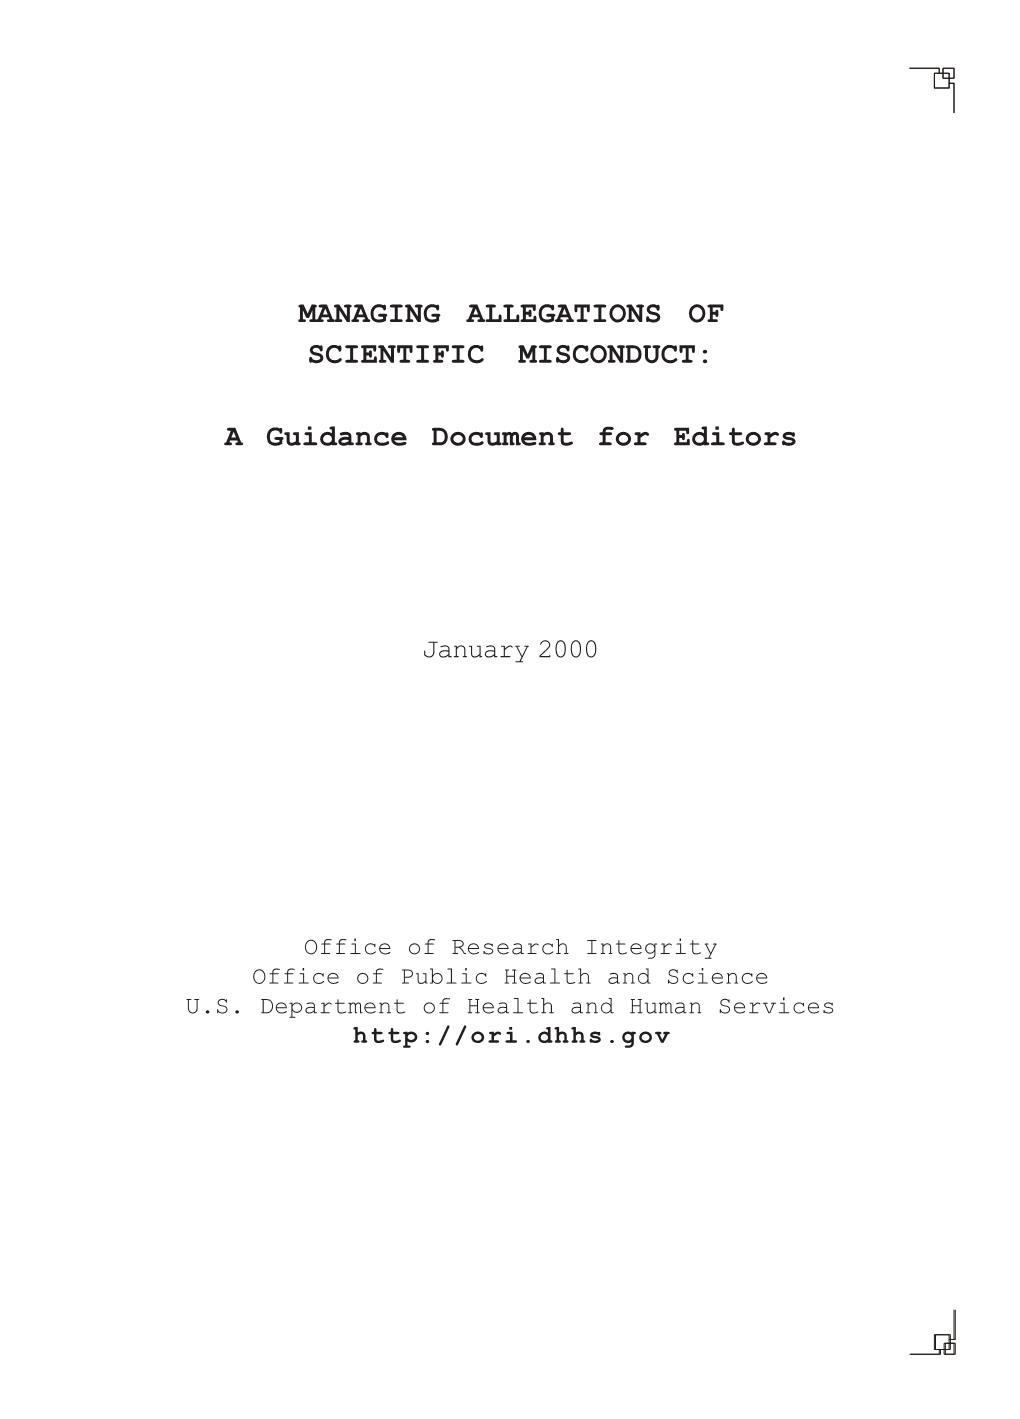 Managing Allegations of Scientific Misconduct: A